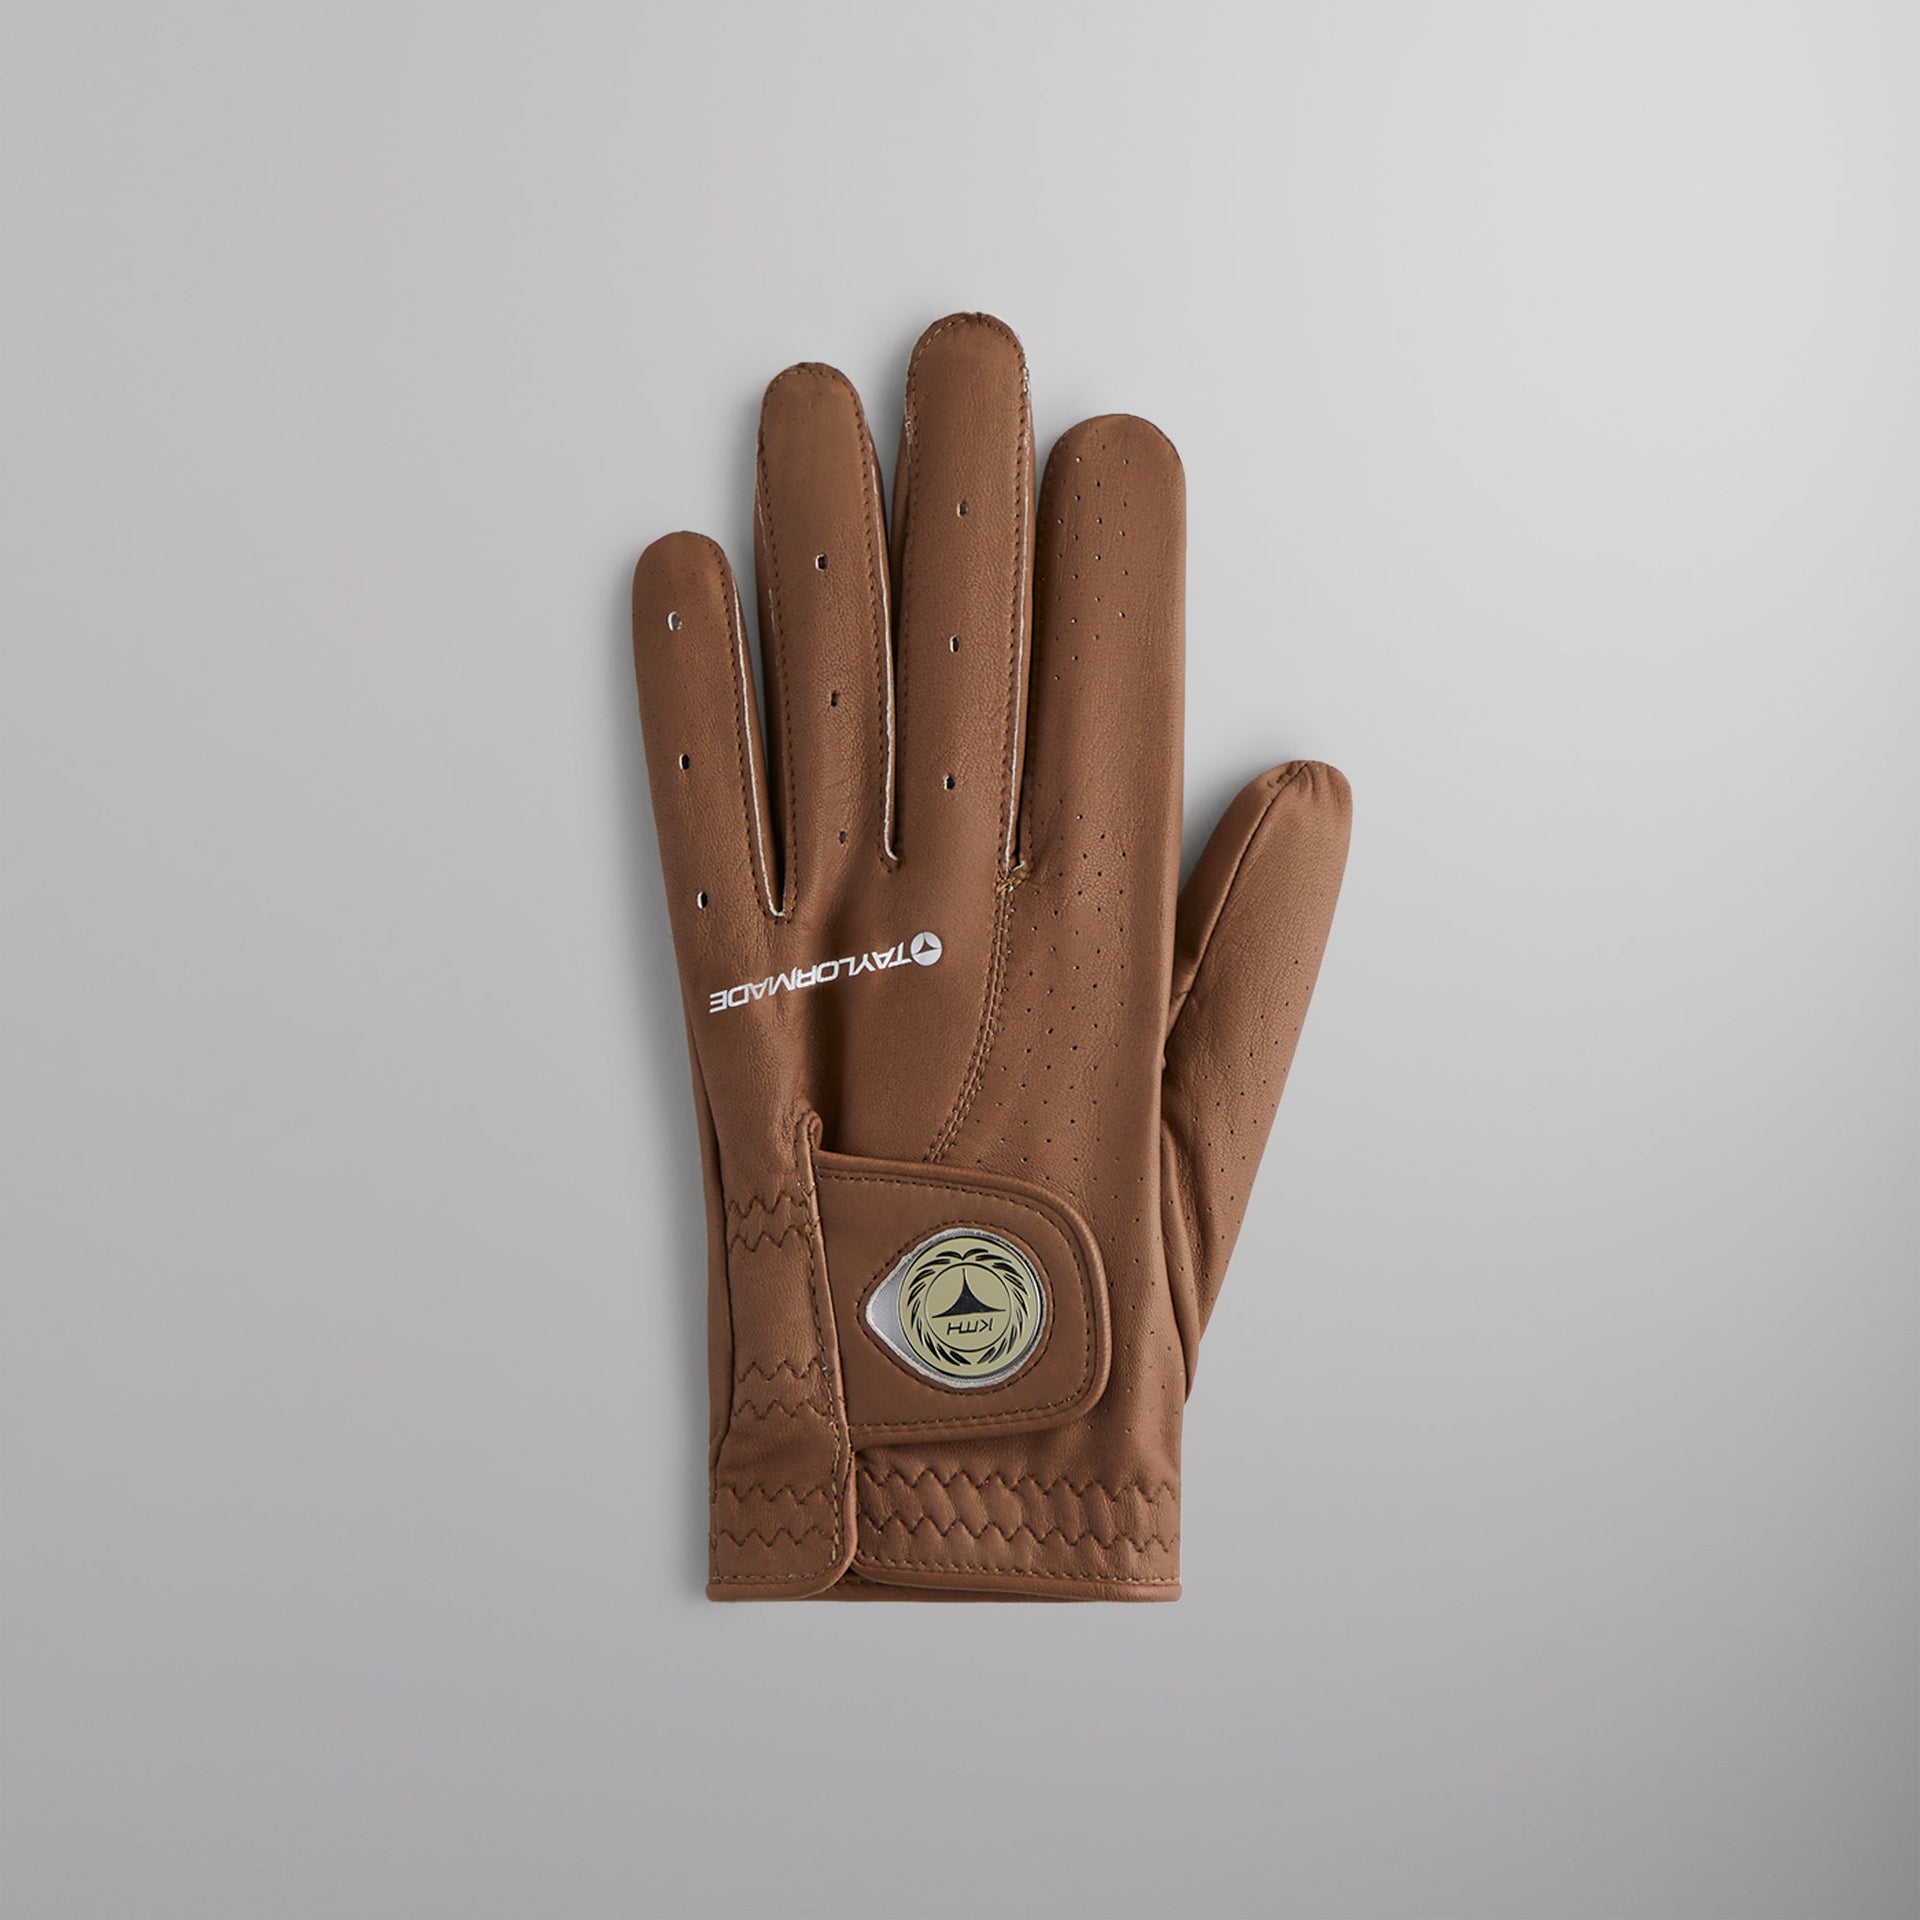 Kith for TaylorMade TP Glove - Tectonic PH